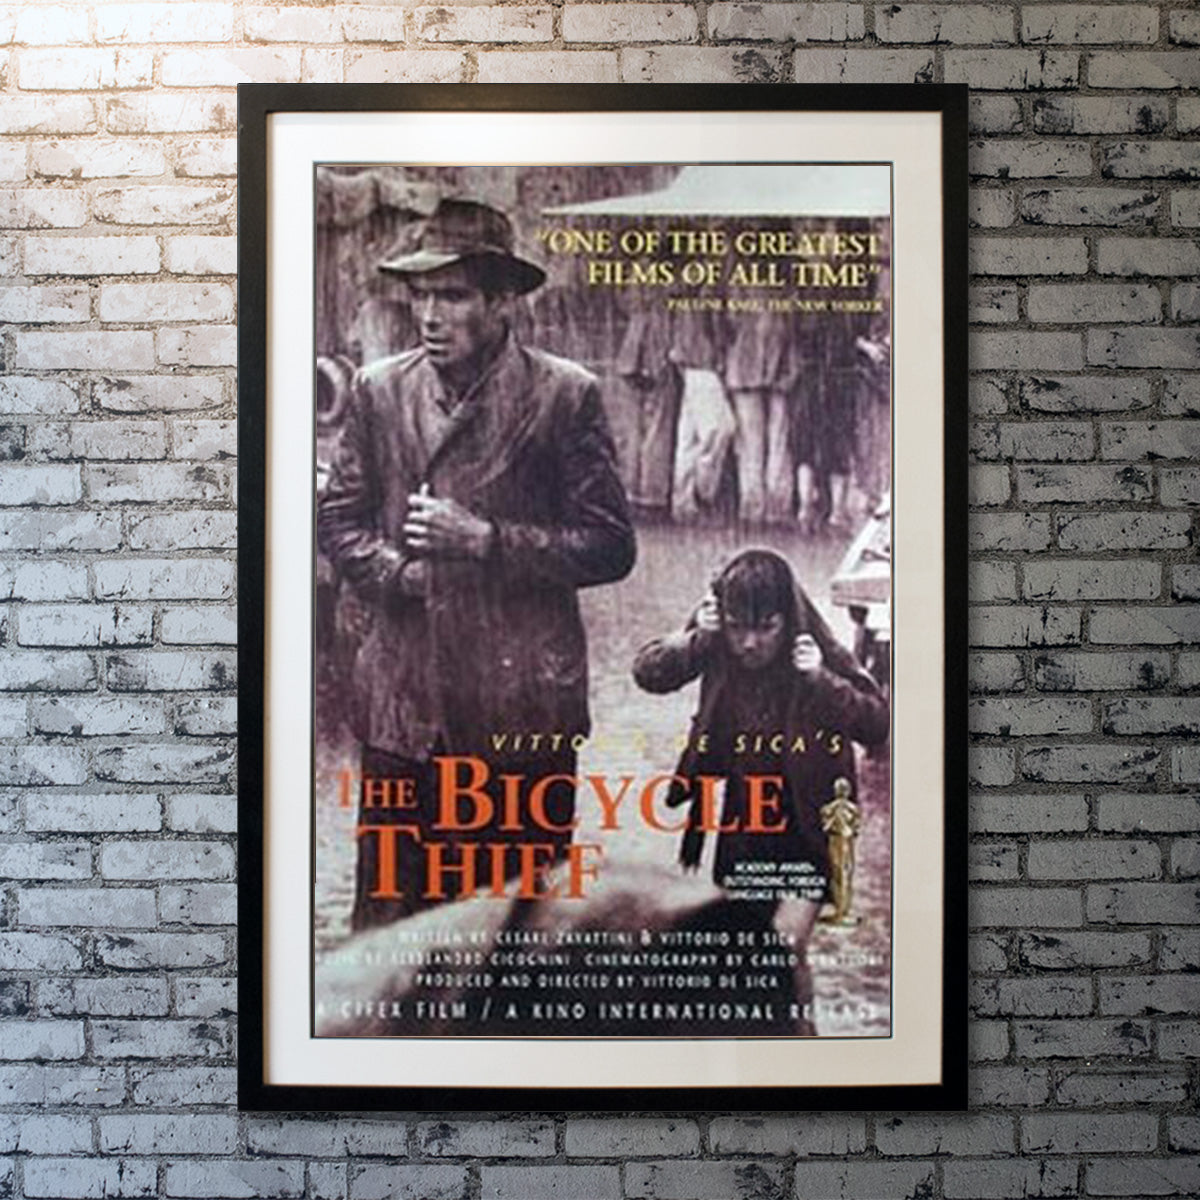 Bicycle Thief, The (1998R)